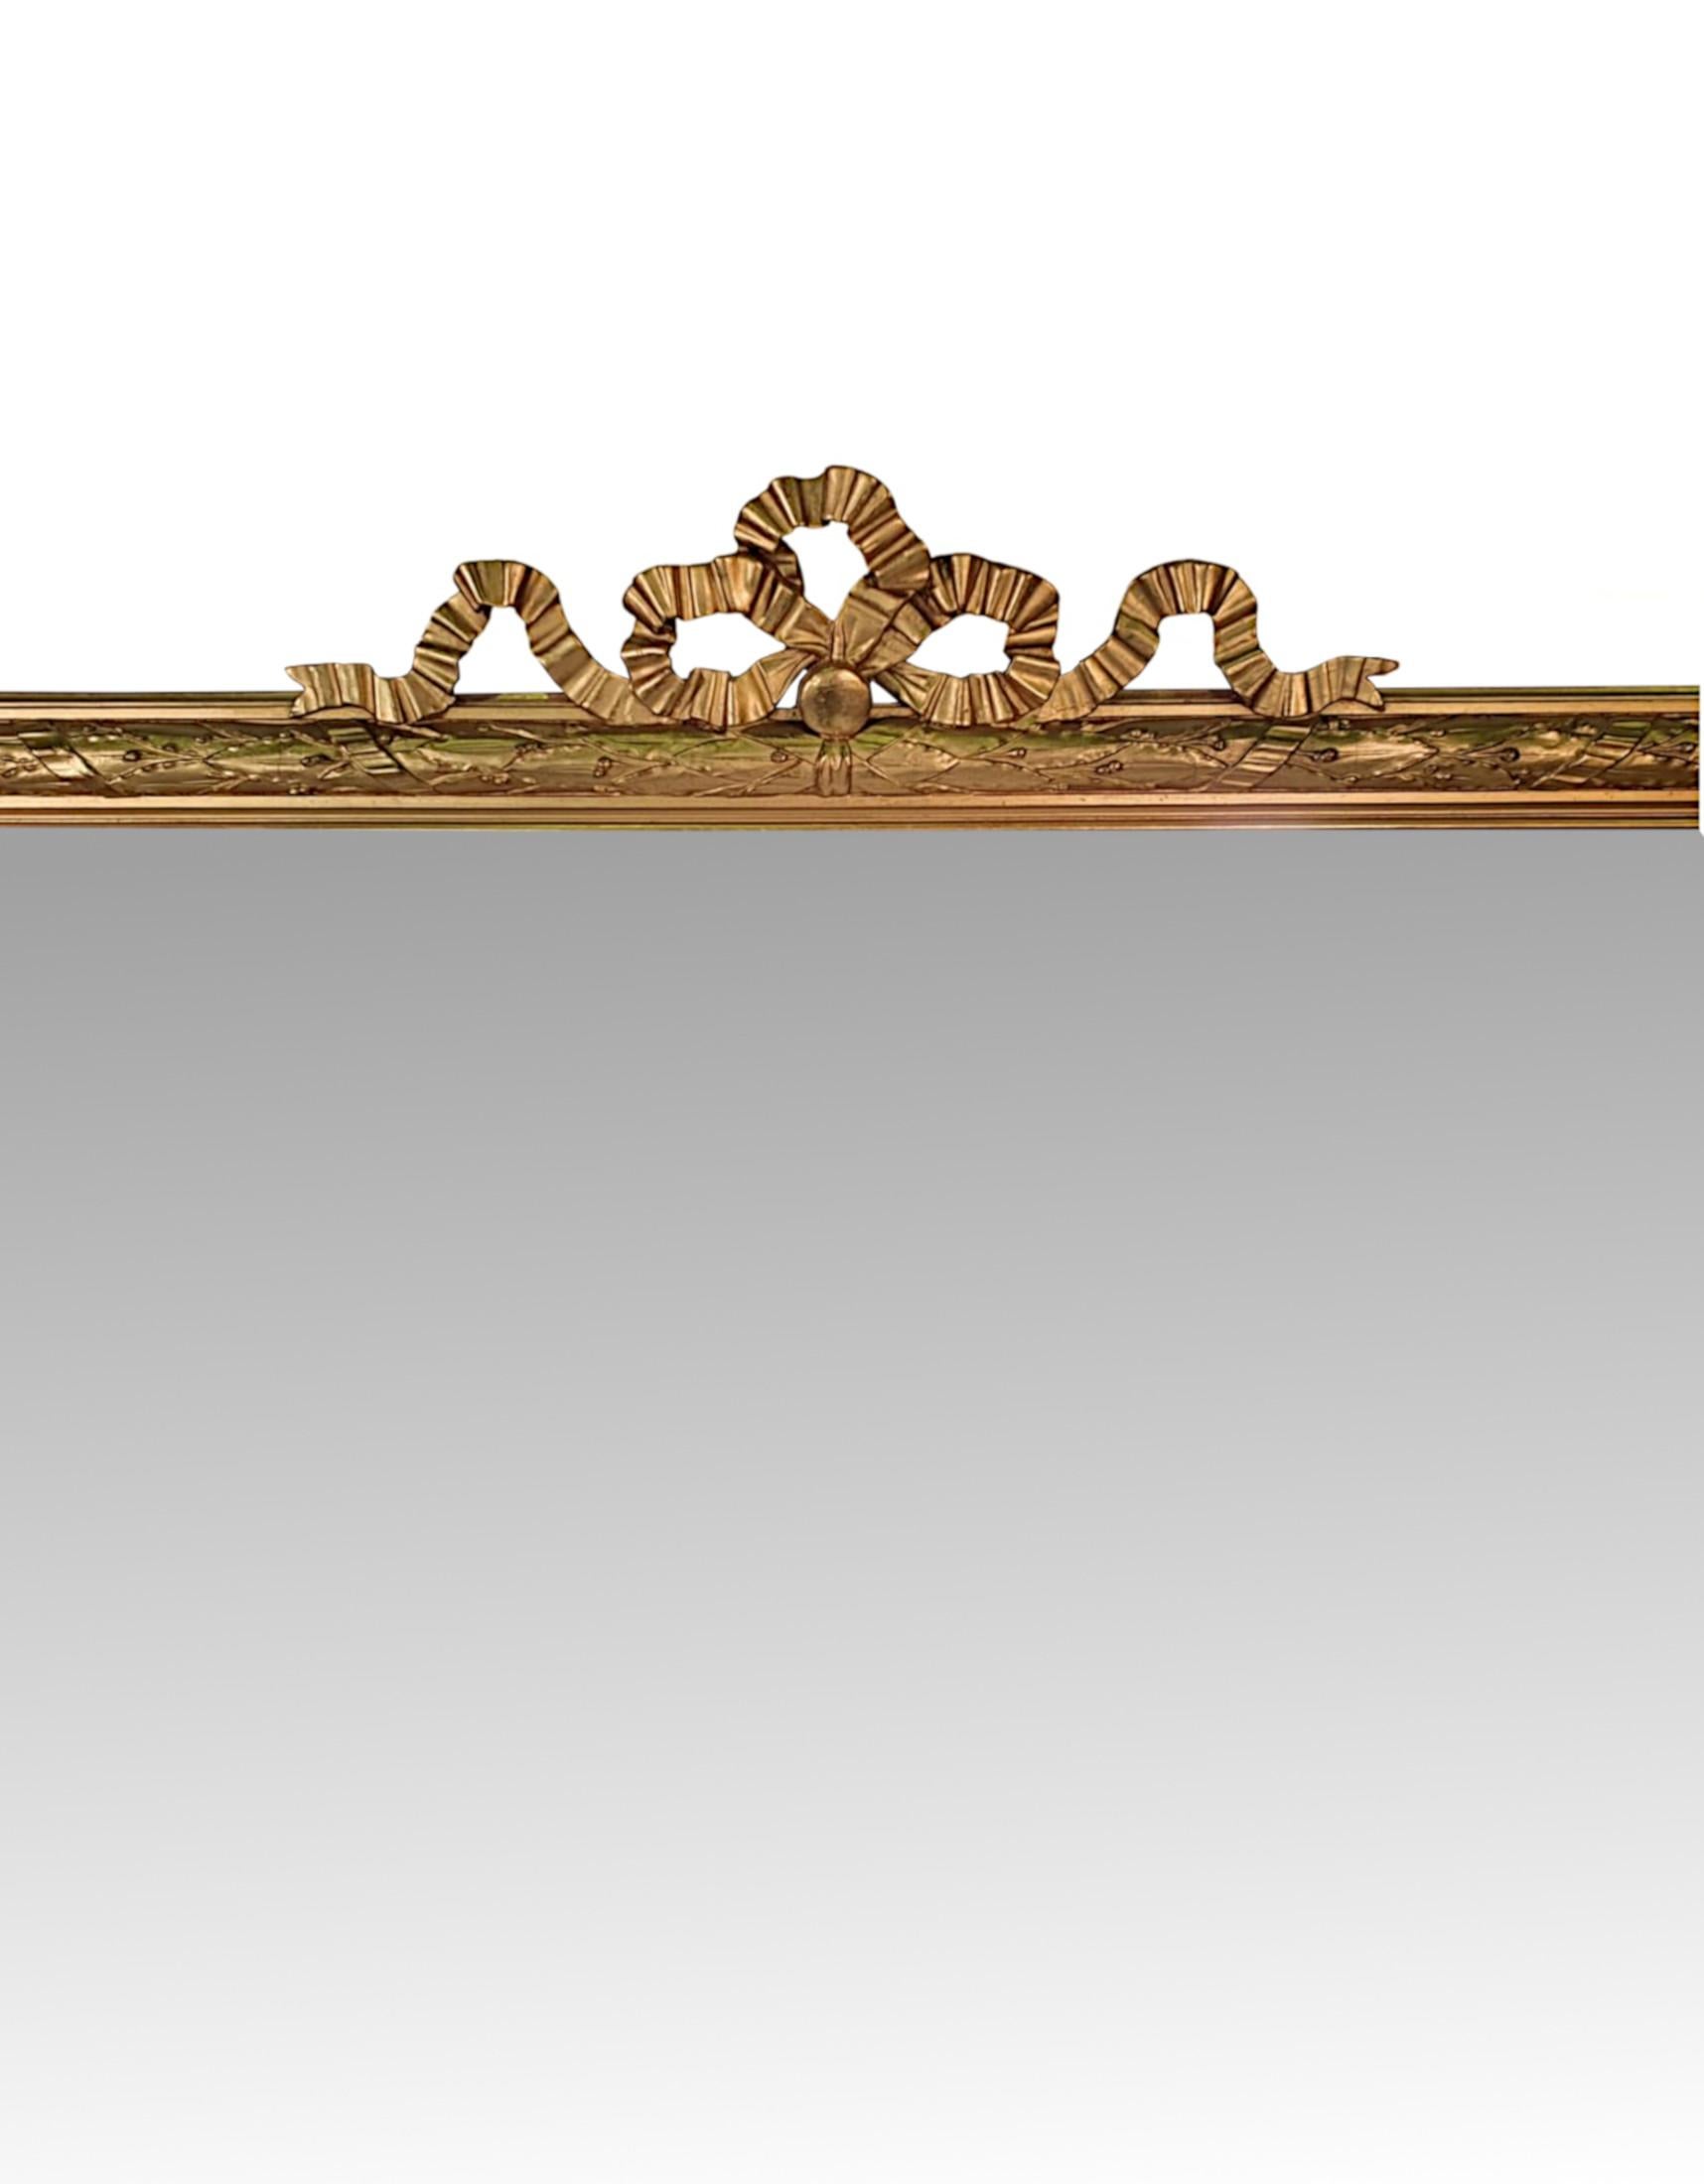 A stunning 19th century giltwood dressing or hall mirror of large proportions. The mirror glass plate of rectangular form set within a moulded giltwood frame with beautiful linen swag, acanthus leaf, foliate and ribbon twist detail, surmounted with